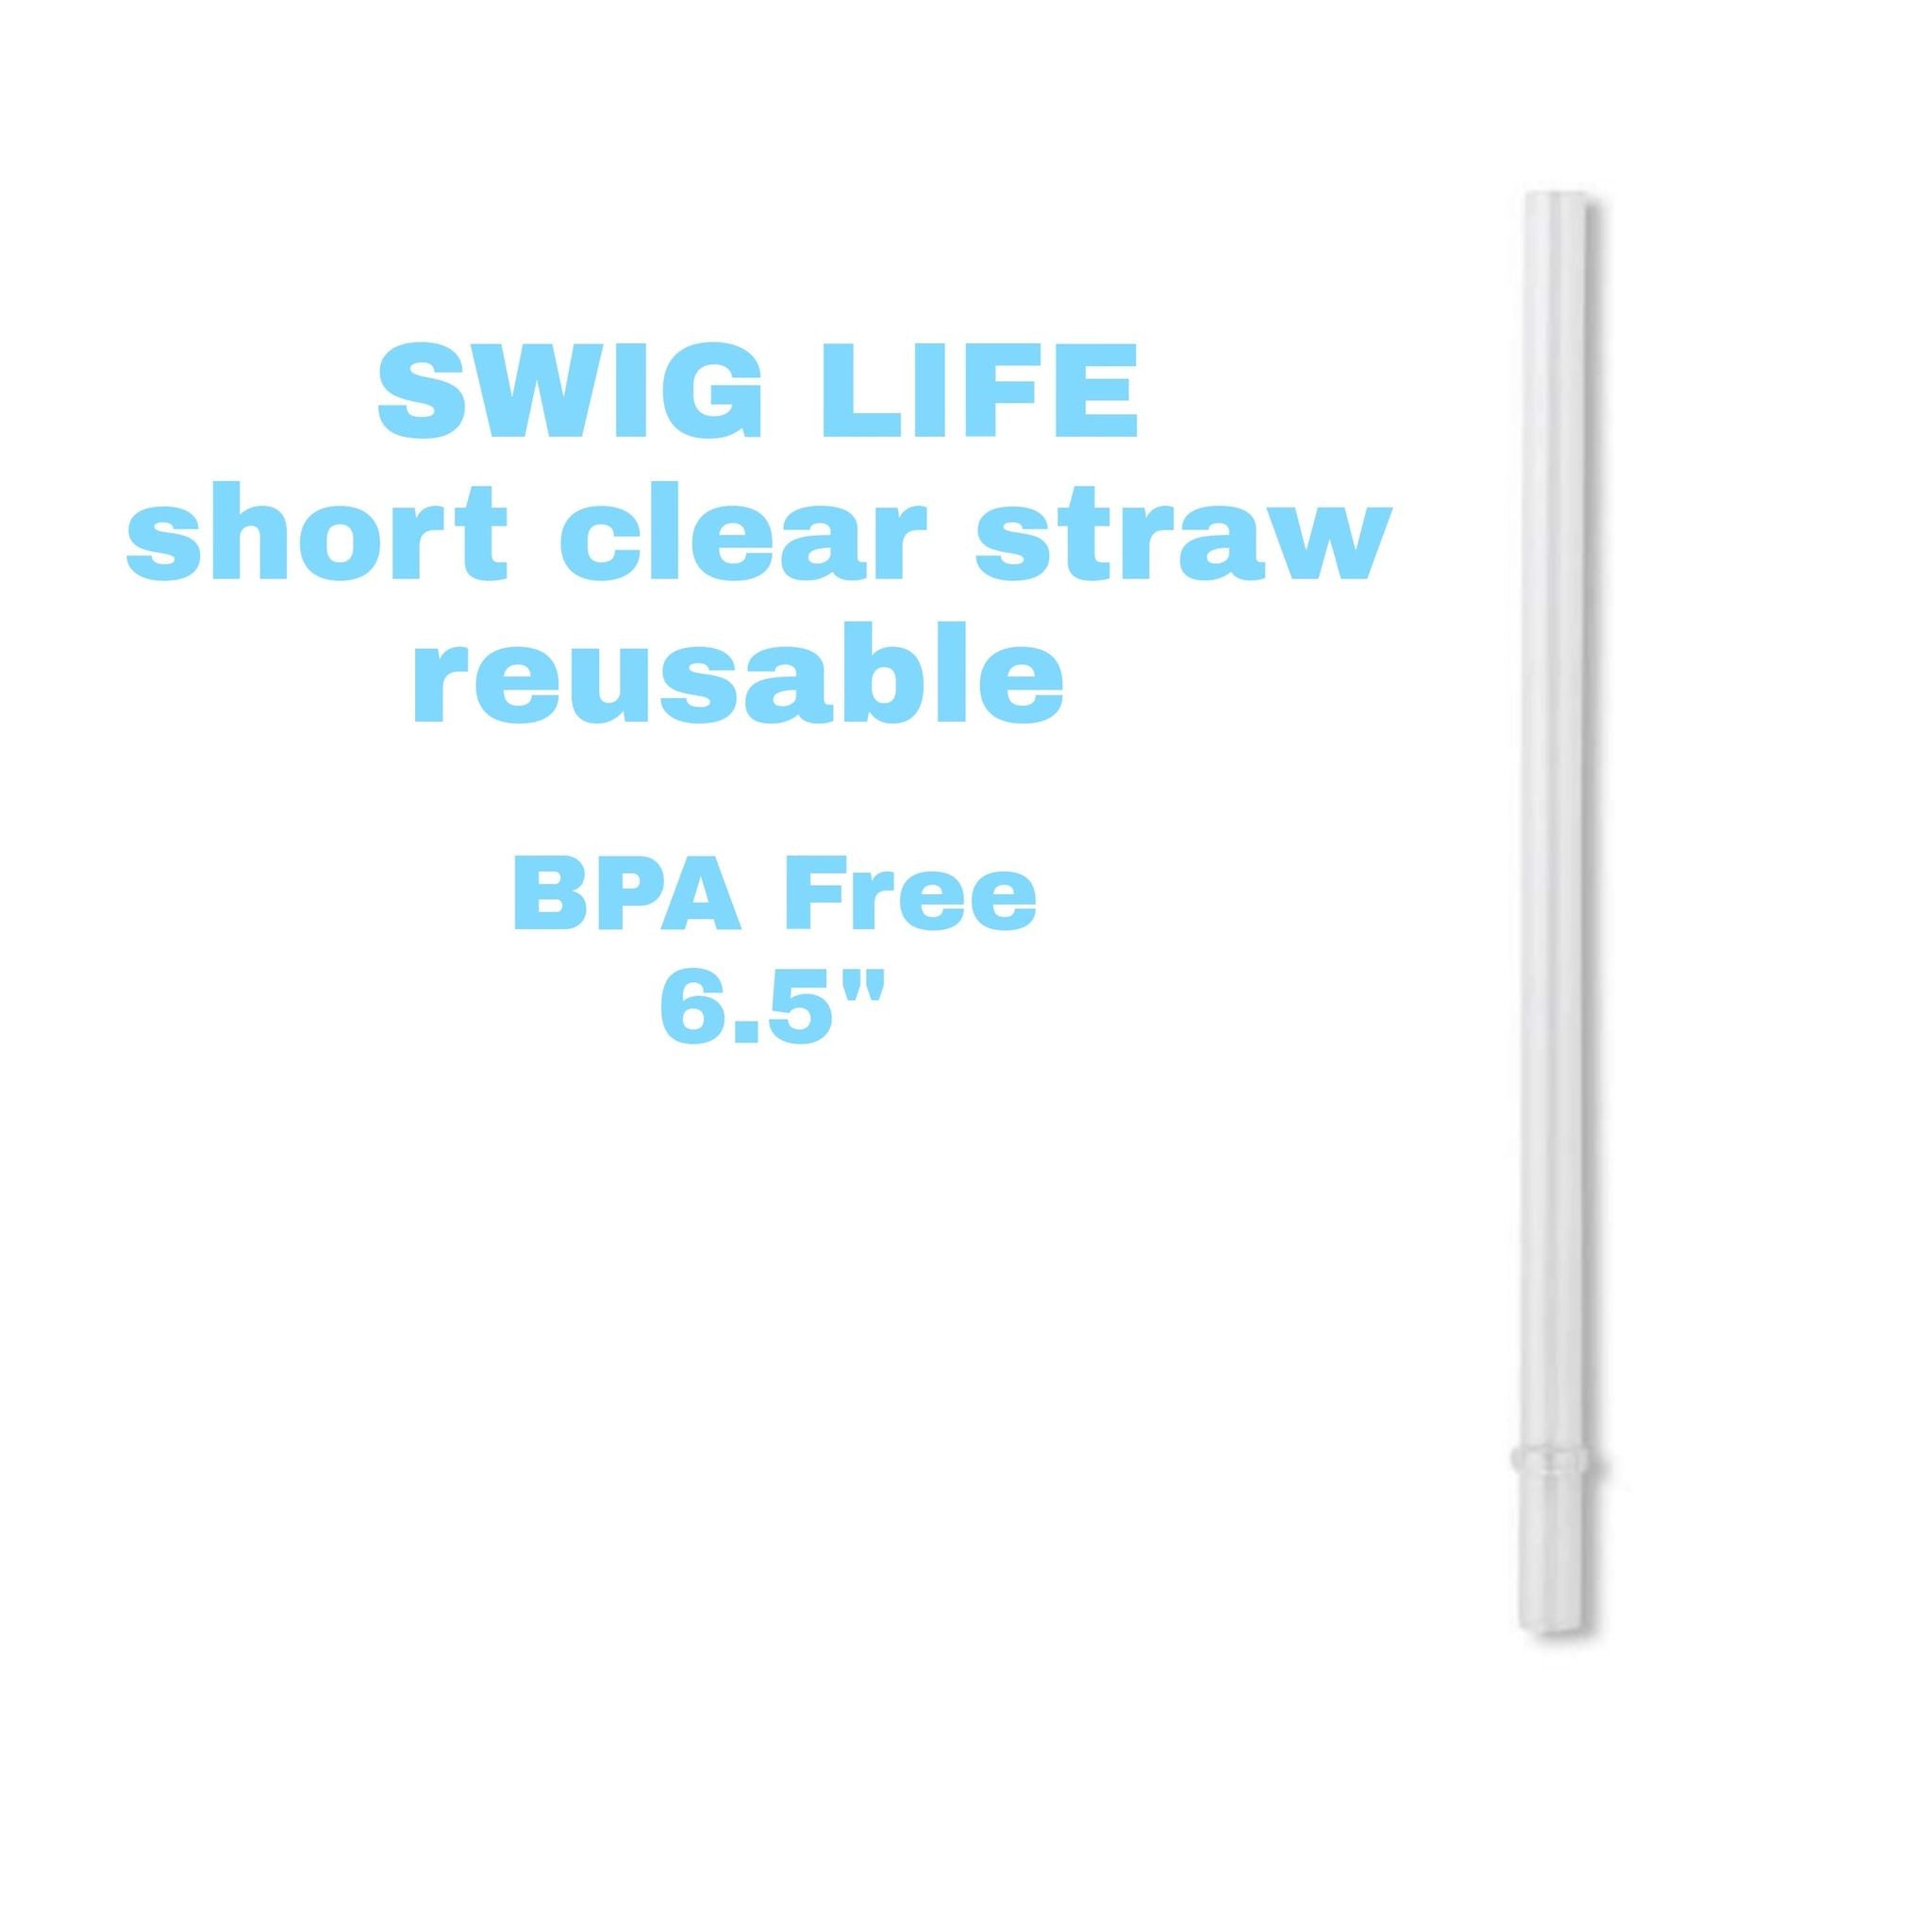 SWIG LIFE CLEAR REUSABLE STRAW